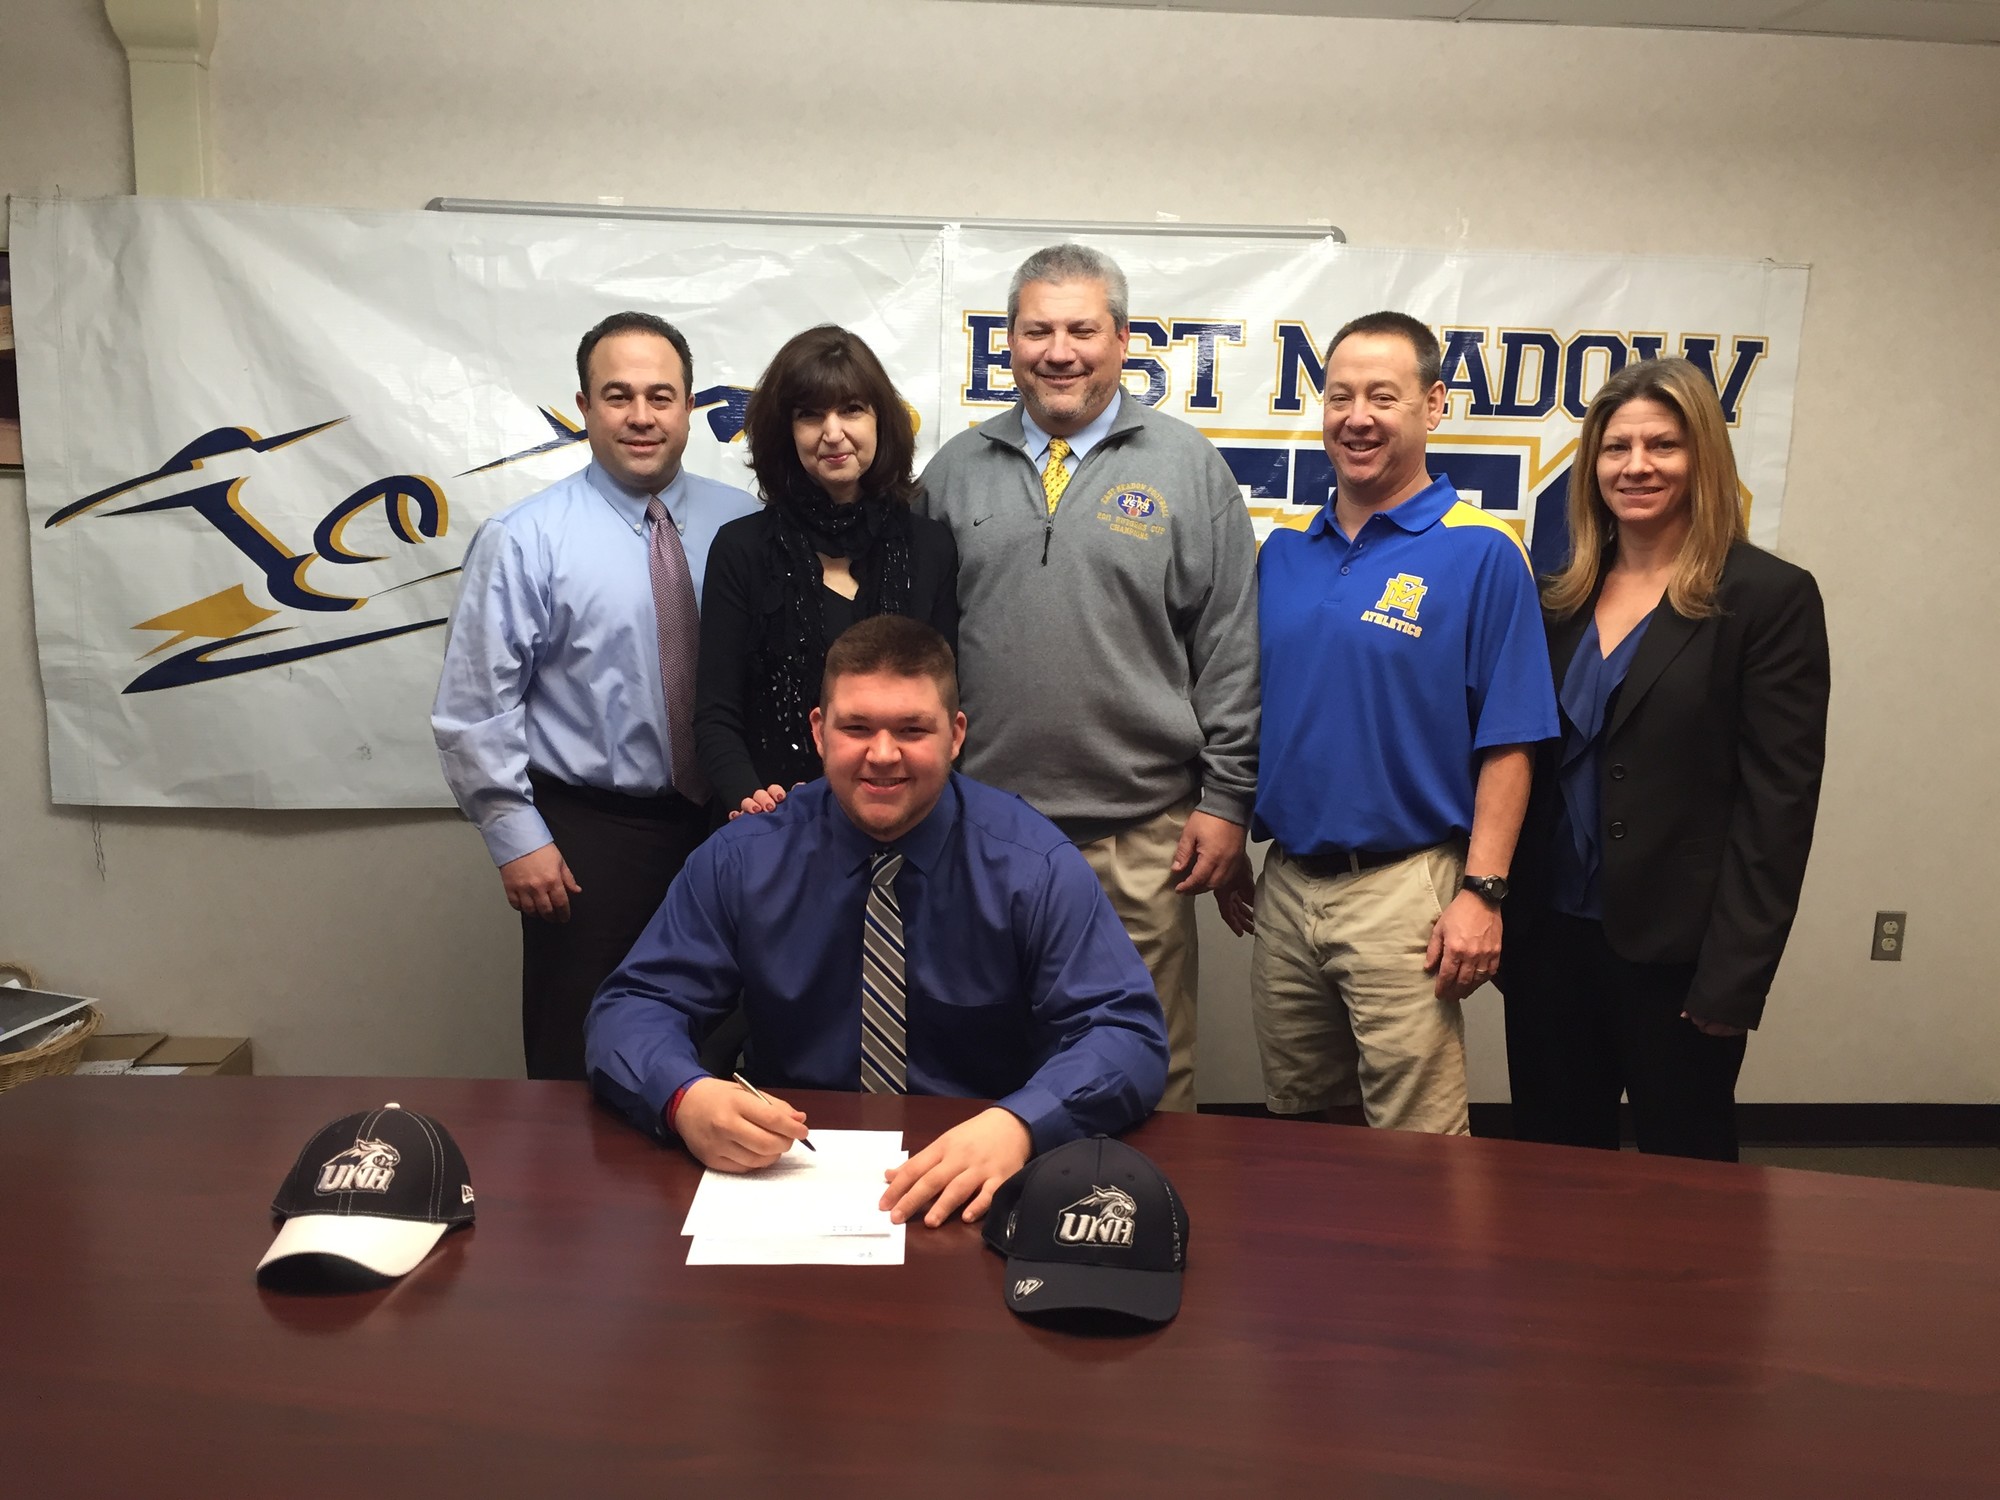 Matt Mascia, 17, signed a letter of intent to play football at the University of New Hampshire last week, with his parents and East Meadow School District officials on hand.